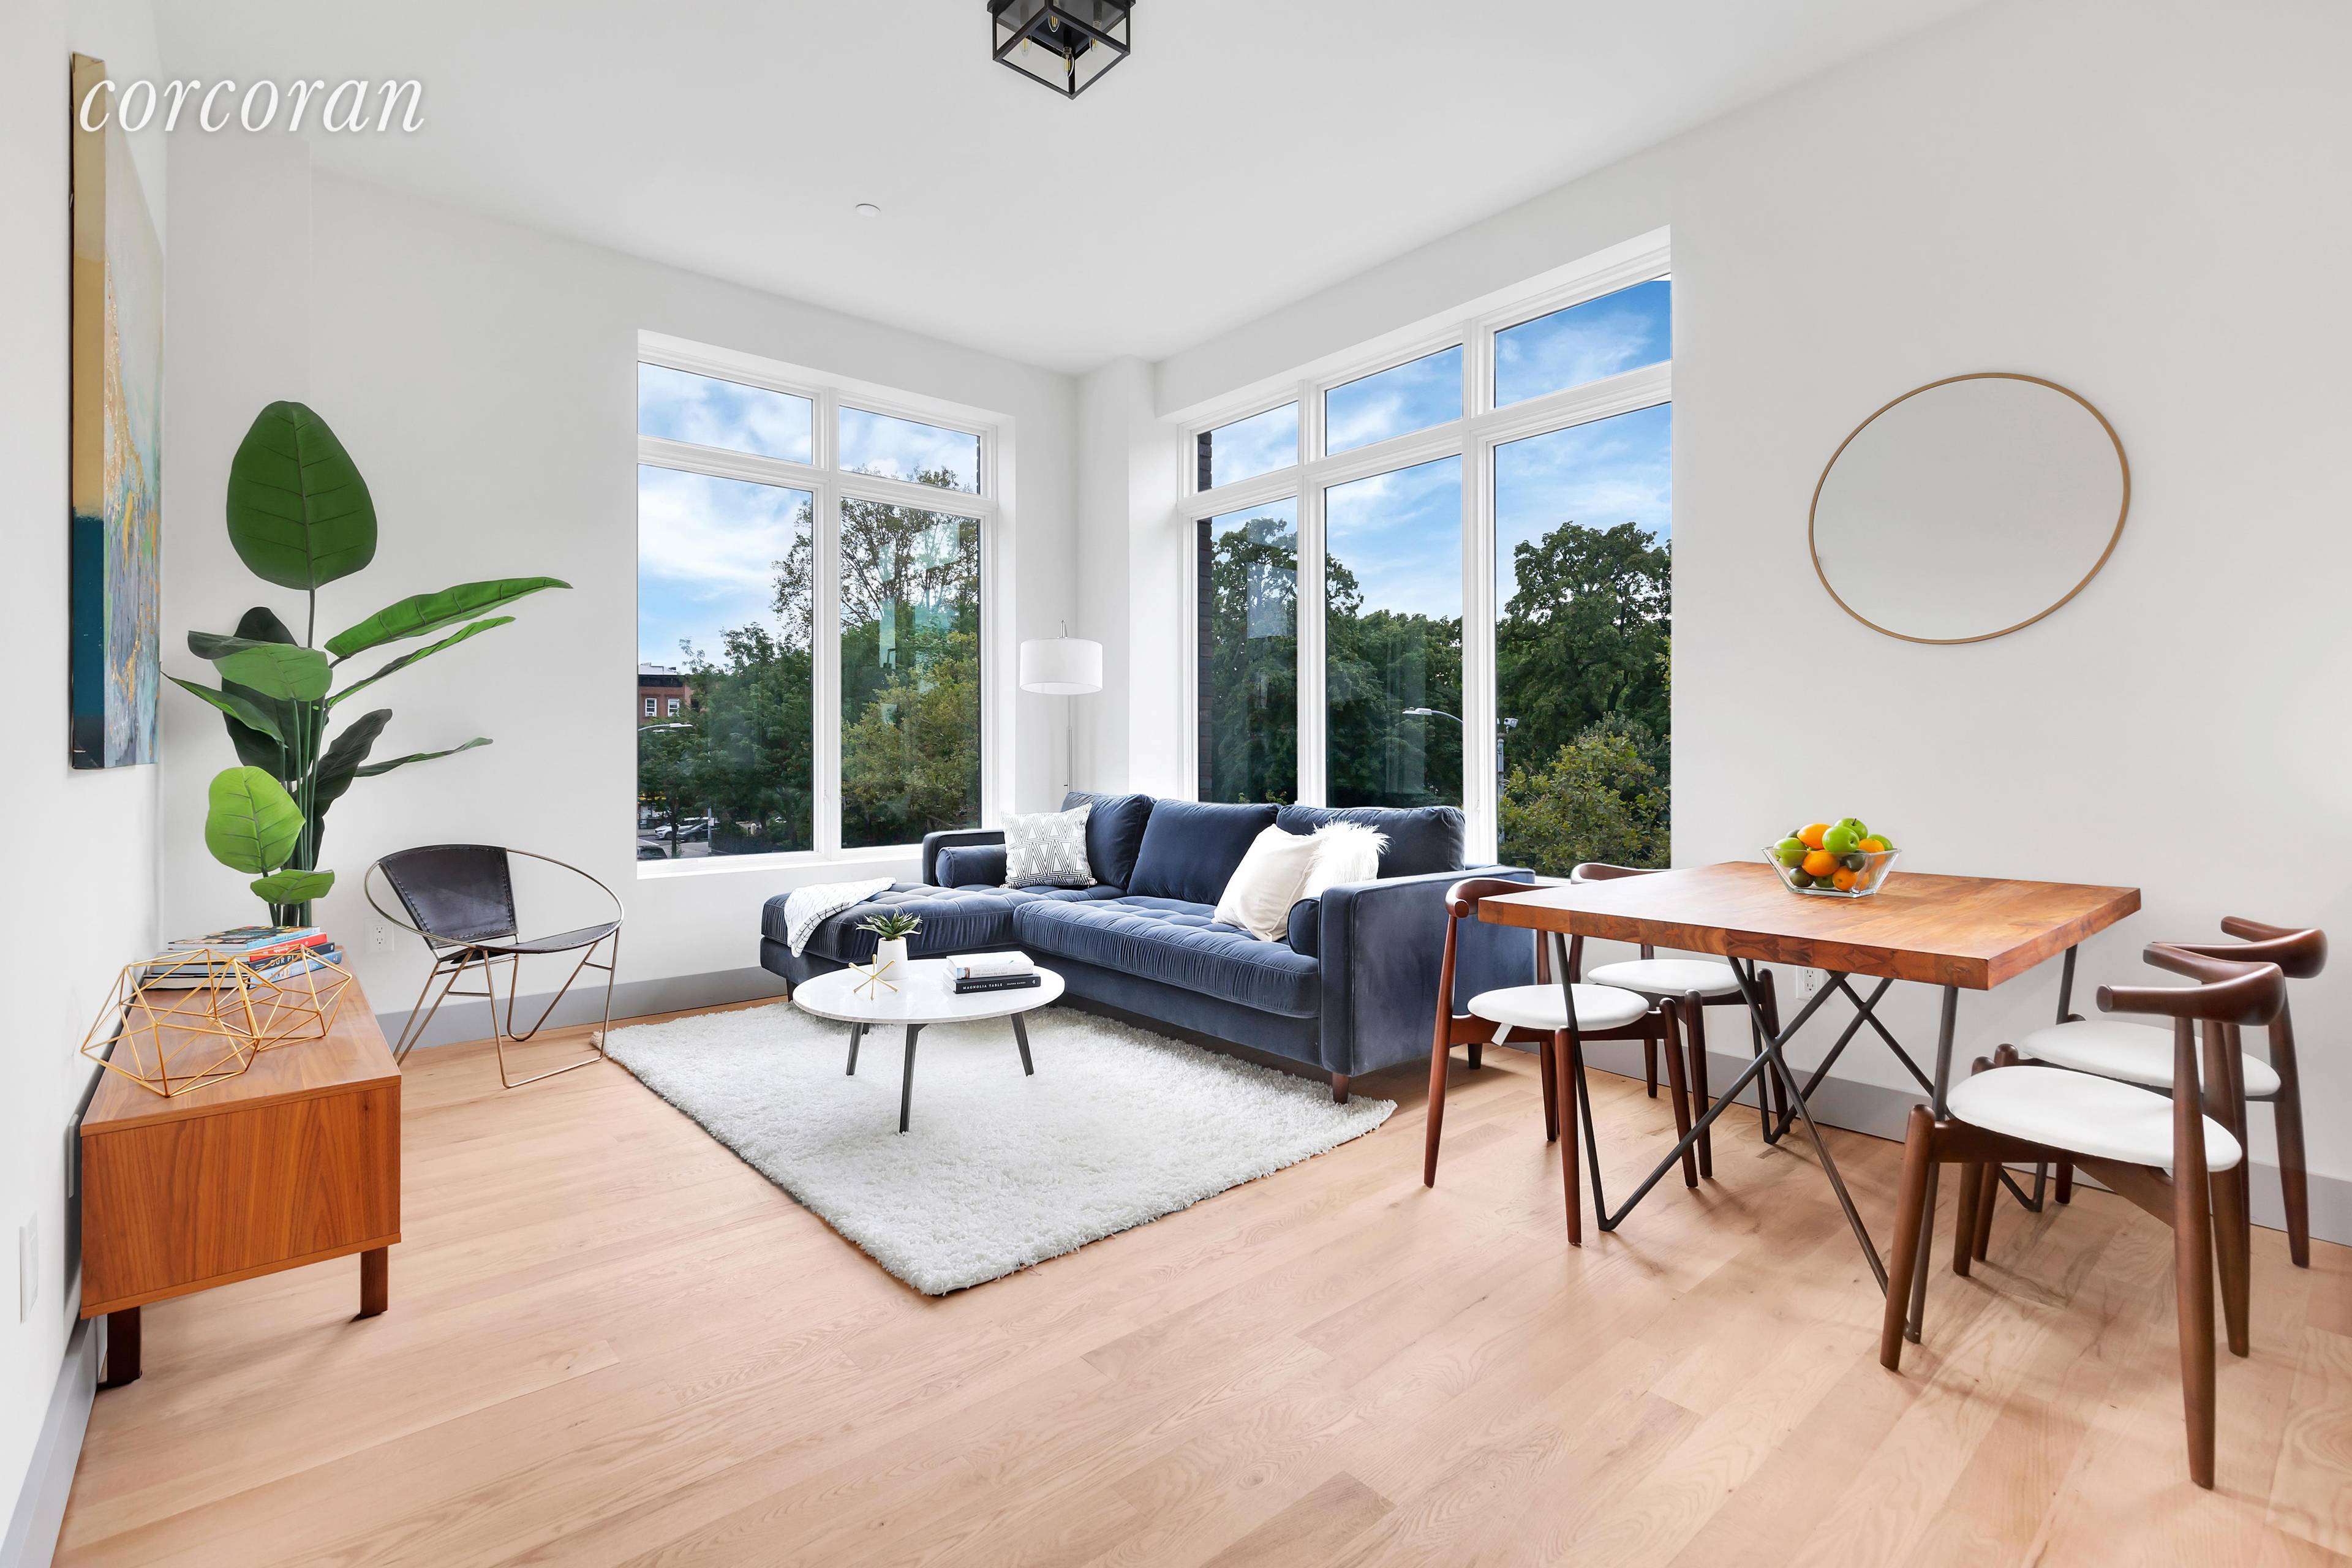 The park feels like a lush front lawn in Residence 2A, a well designed corner 2BR 2BA 977 square foot home with treetop and park views from every single room.